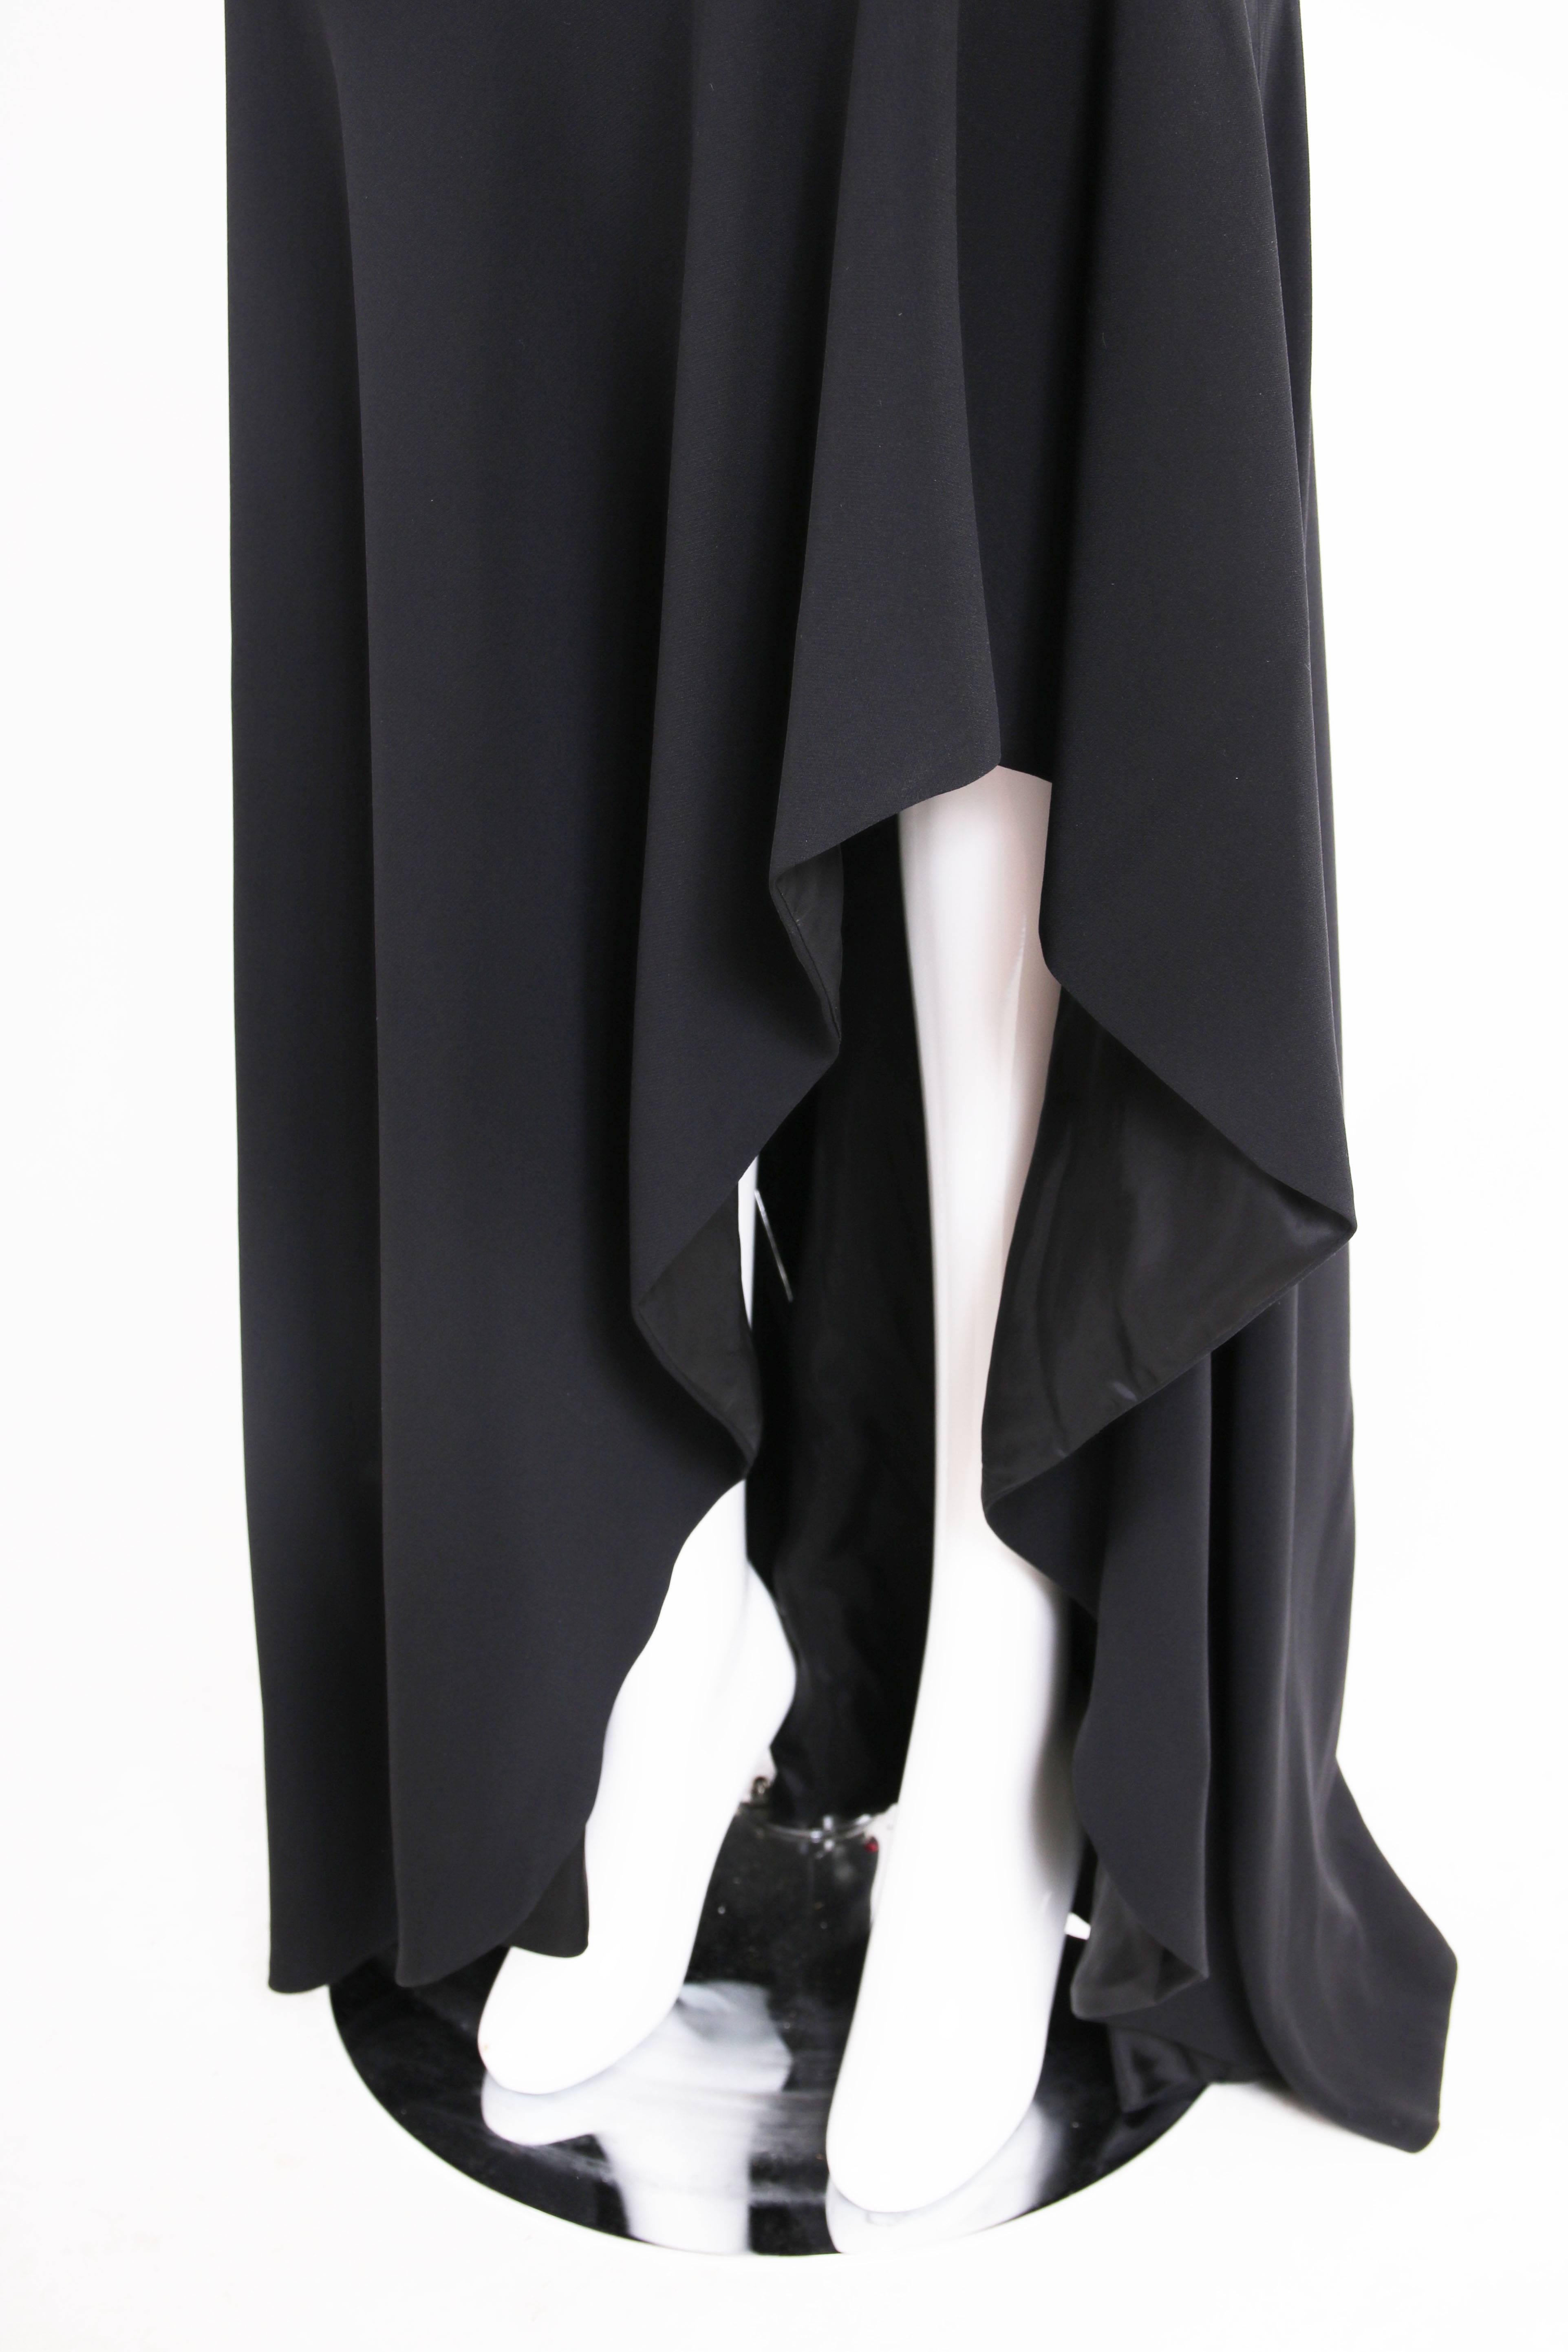 Tom Ford Black Strapless Gown with Ruffled Frontal Slit and Matching Bolero Top 2